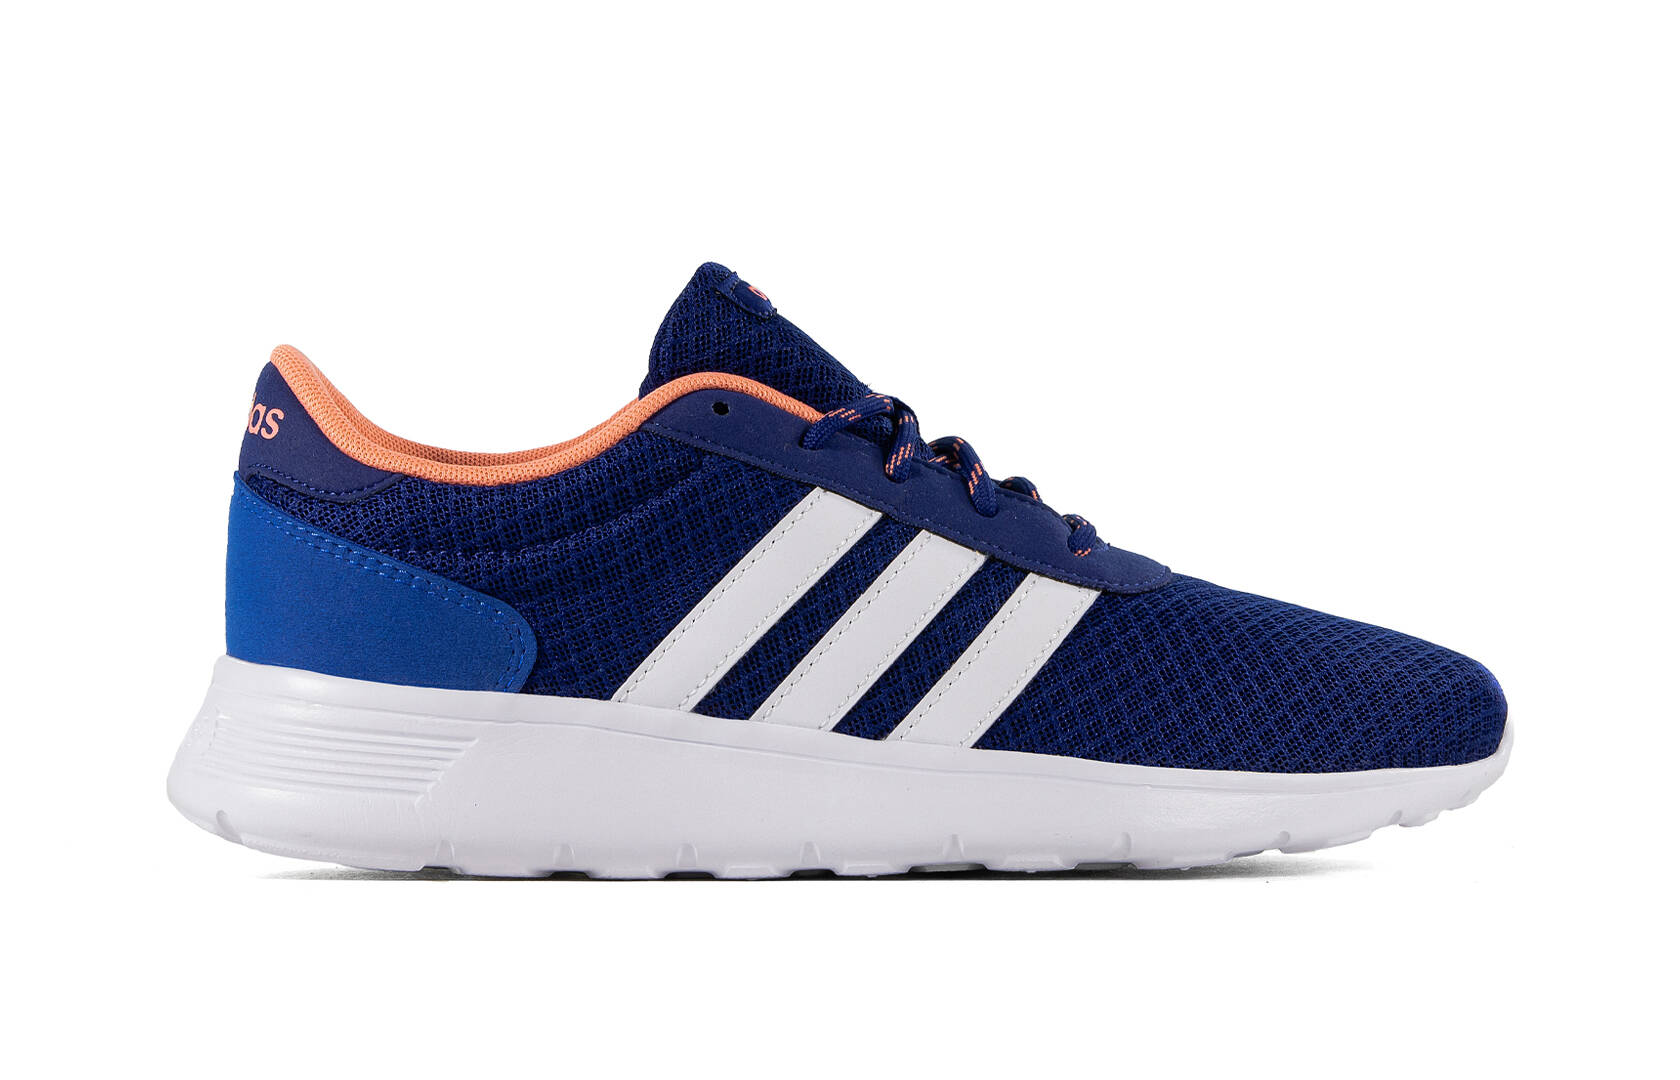 Adidas LITE RACER W AW4964 women's shoes